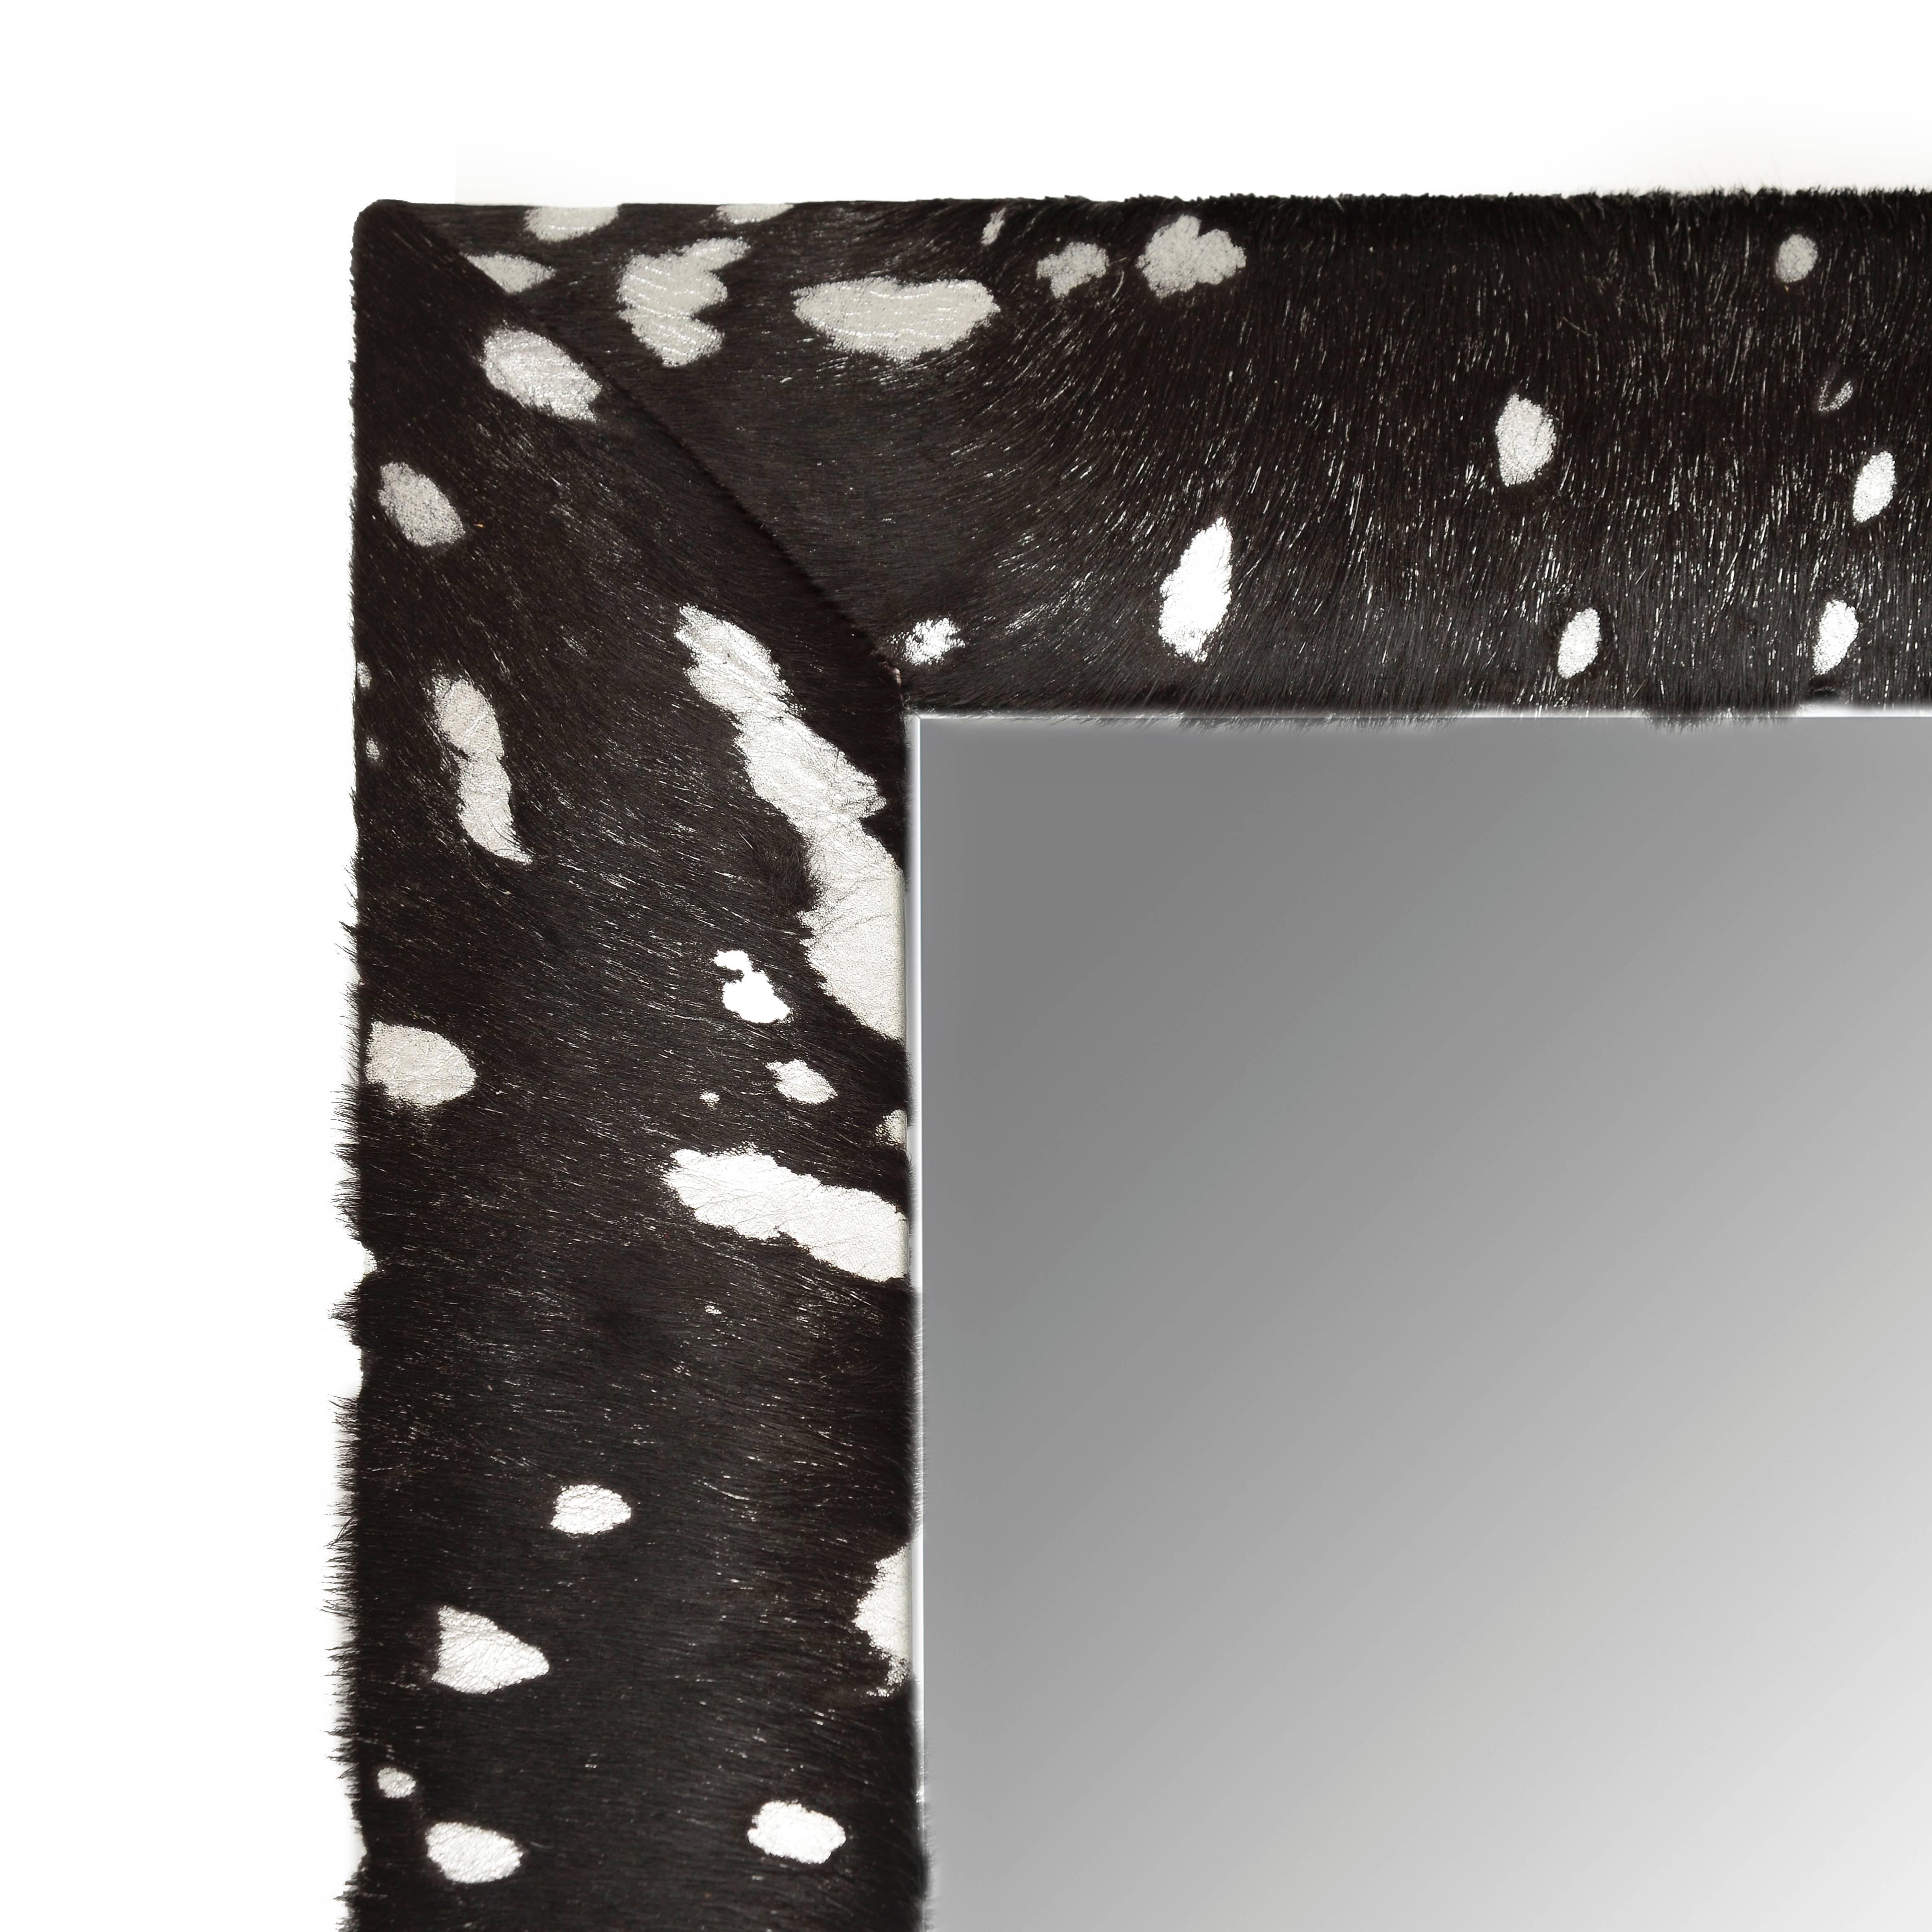 Contemporary black cowhide hair with silver metallic acid wash splash framed beveled mirror by KLASP home.

Made by skilled professional craftsmen.
1 ¼” beveled mirror.
4” wide leather frame.
Hand-stitched corners.
Measurements including frame